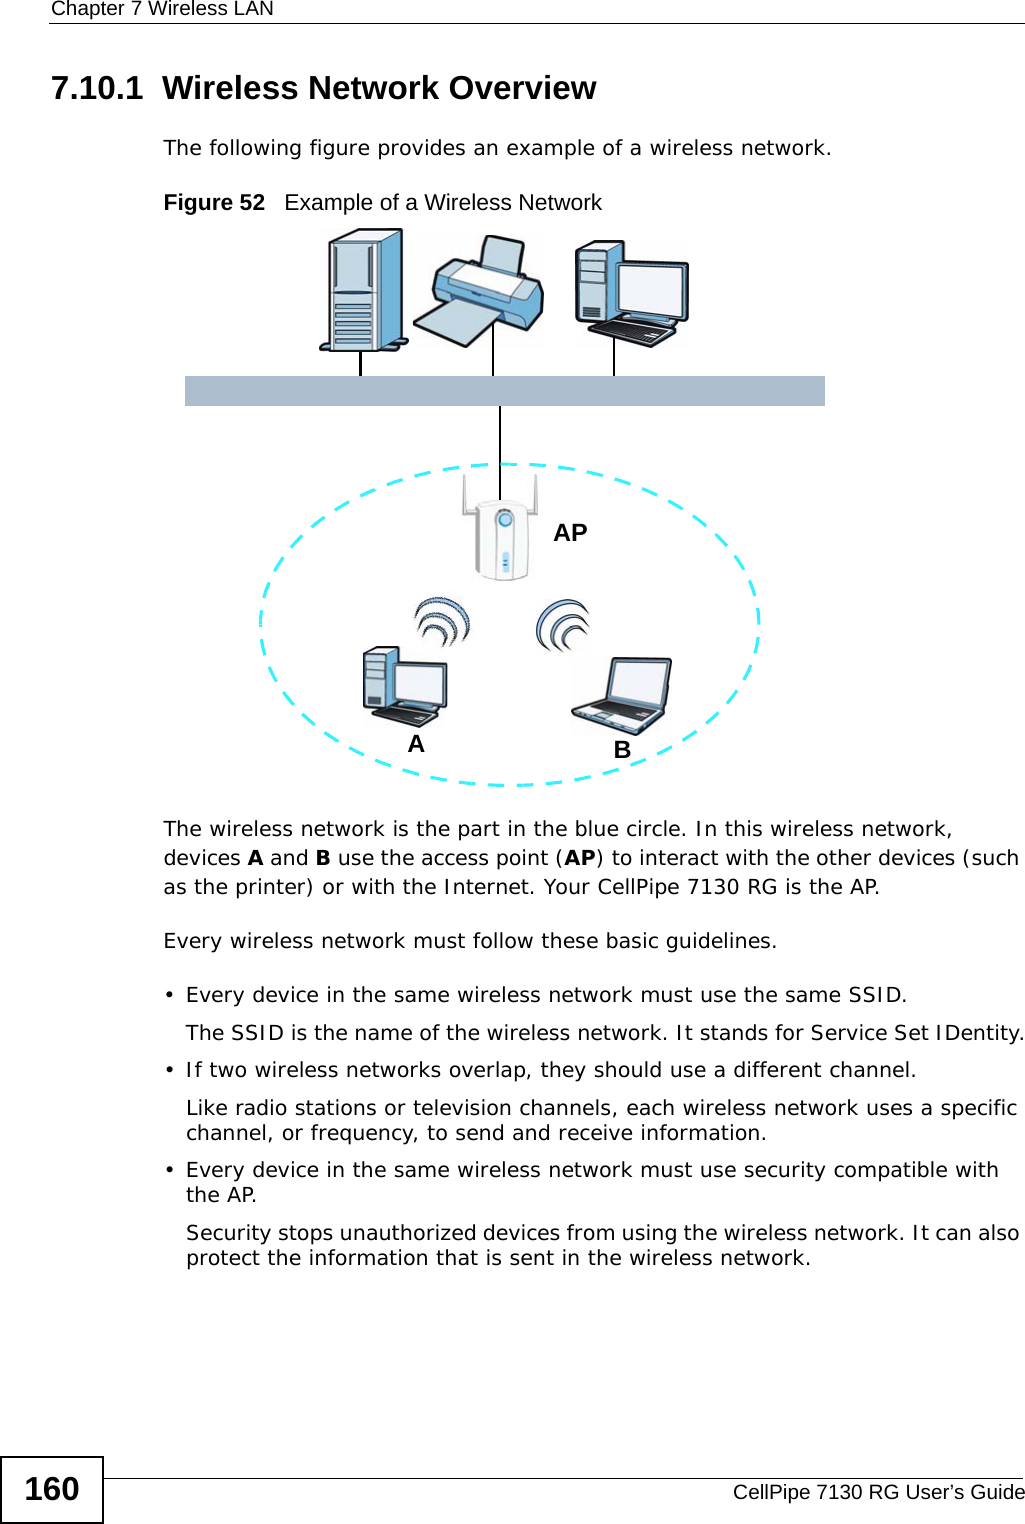 Chapter 7 Wireless LANCellPipe 7130 RG User’s Guide1607.10.1  Wireless Network OverviewThe following figure provides an example of a wireless network.Figure 52   Example of a Wireless NetworkThe wireless network is the part in the blue circle. In this wireless network, devices A and B use the access point (AP) to interact with the other devices (such as the printer) or with the Internet. Your CellPipe 7130 RG is the AP.Every wireless network must follow these basic guidelines.• Every device in the same wireless network must use the same SSID.The SSID is the name of the wireless network. It stands for Service Set IDentity.• If two wireless networks overlap, they should use a different channel.Like radio stations or television channels, each wireless network uses a specific channel, or frequency, to send and receive information.• Every device in the same wireless network must use security compatible with the AP.Security stops unauthorized devices from using the wireless network. It can also protect the information that is sent in the wireless network.ABAP